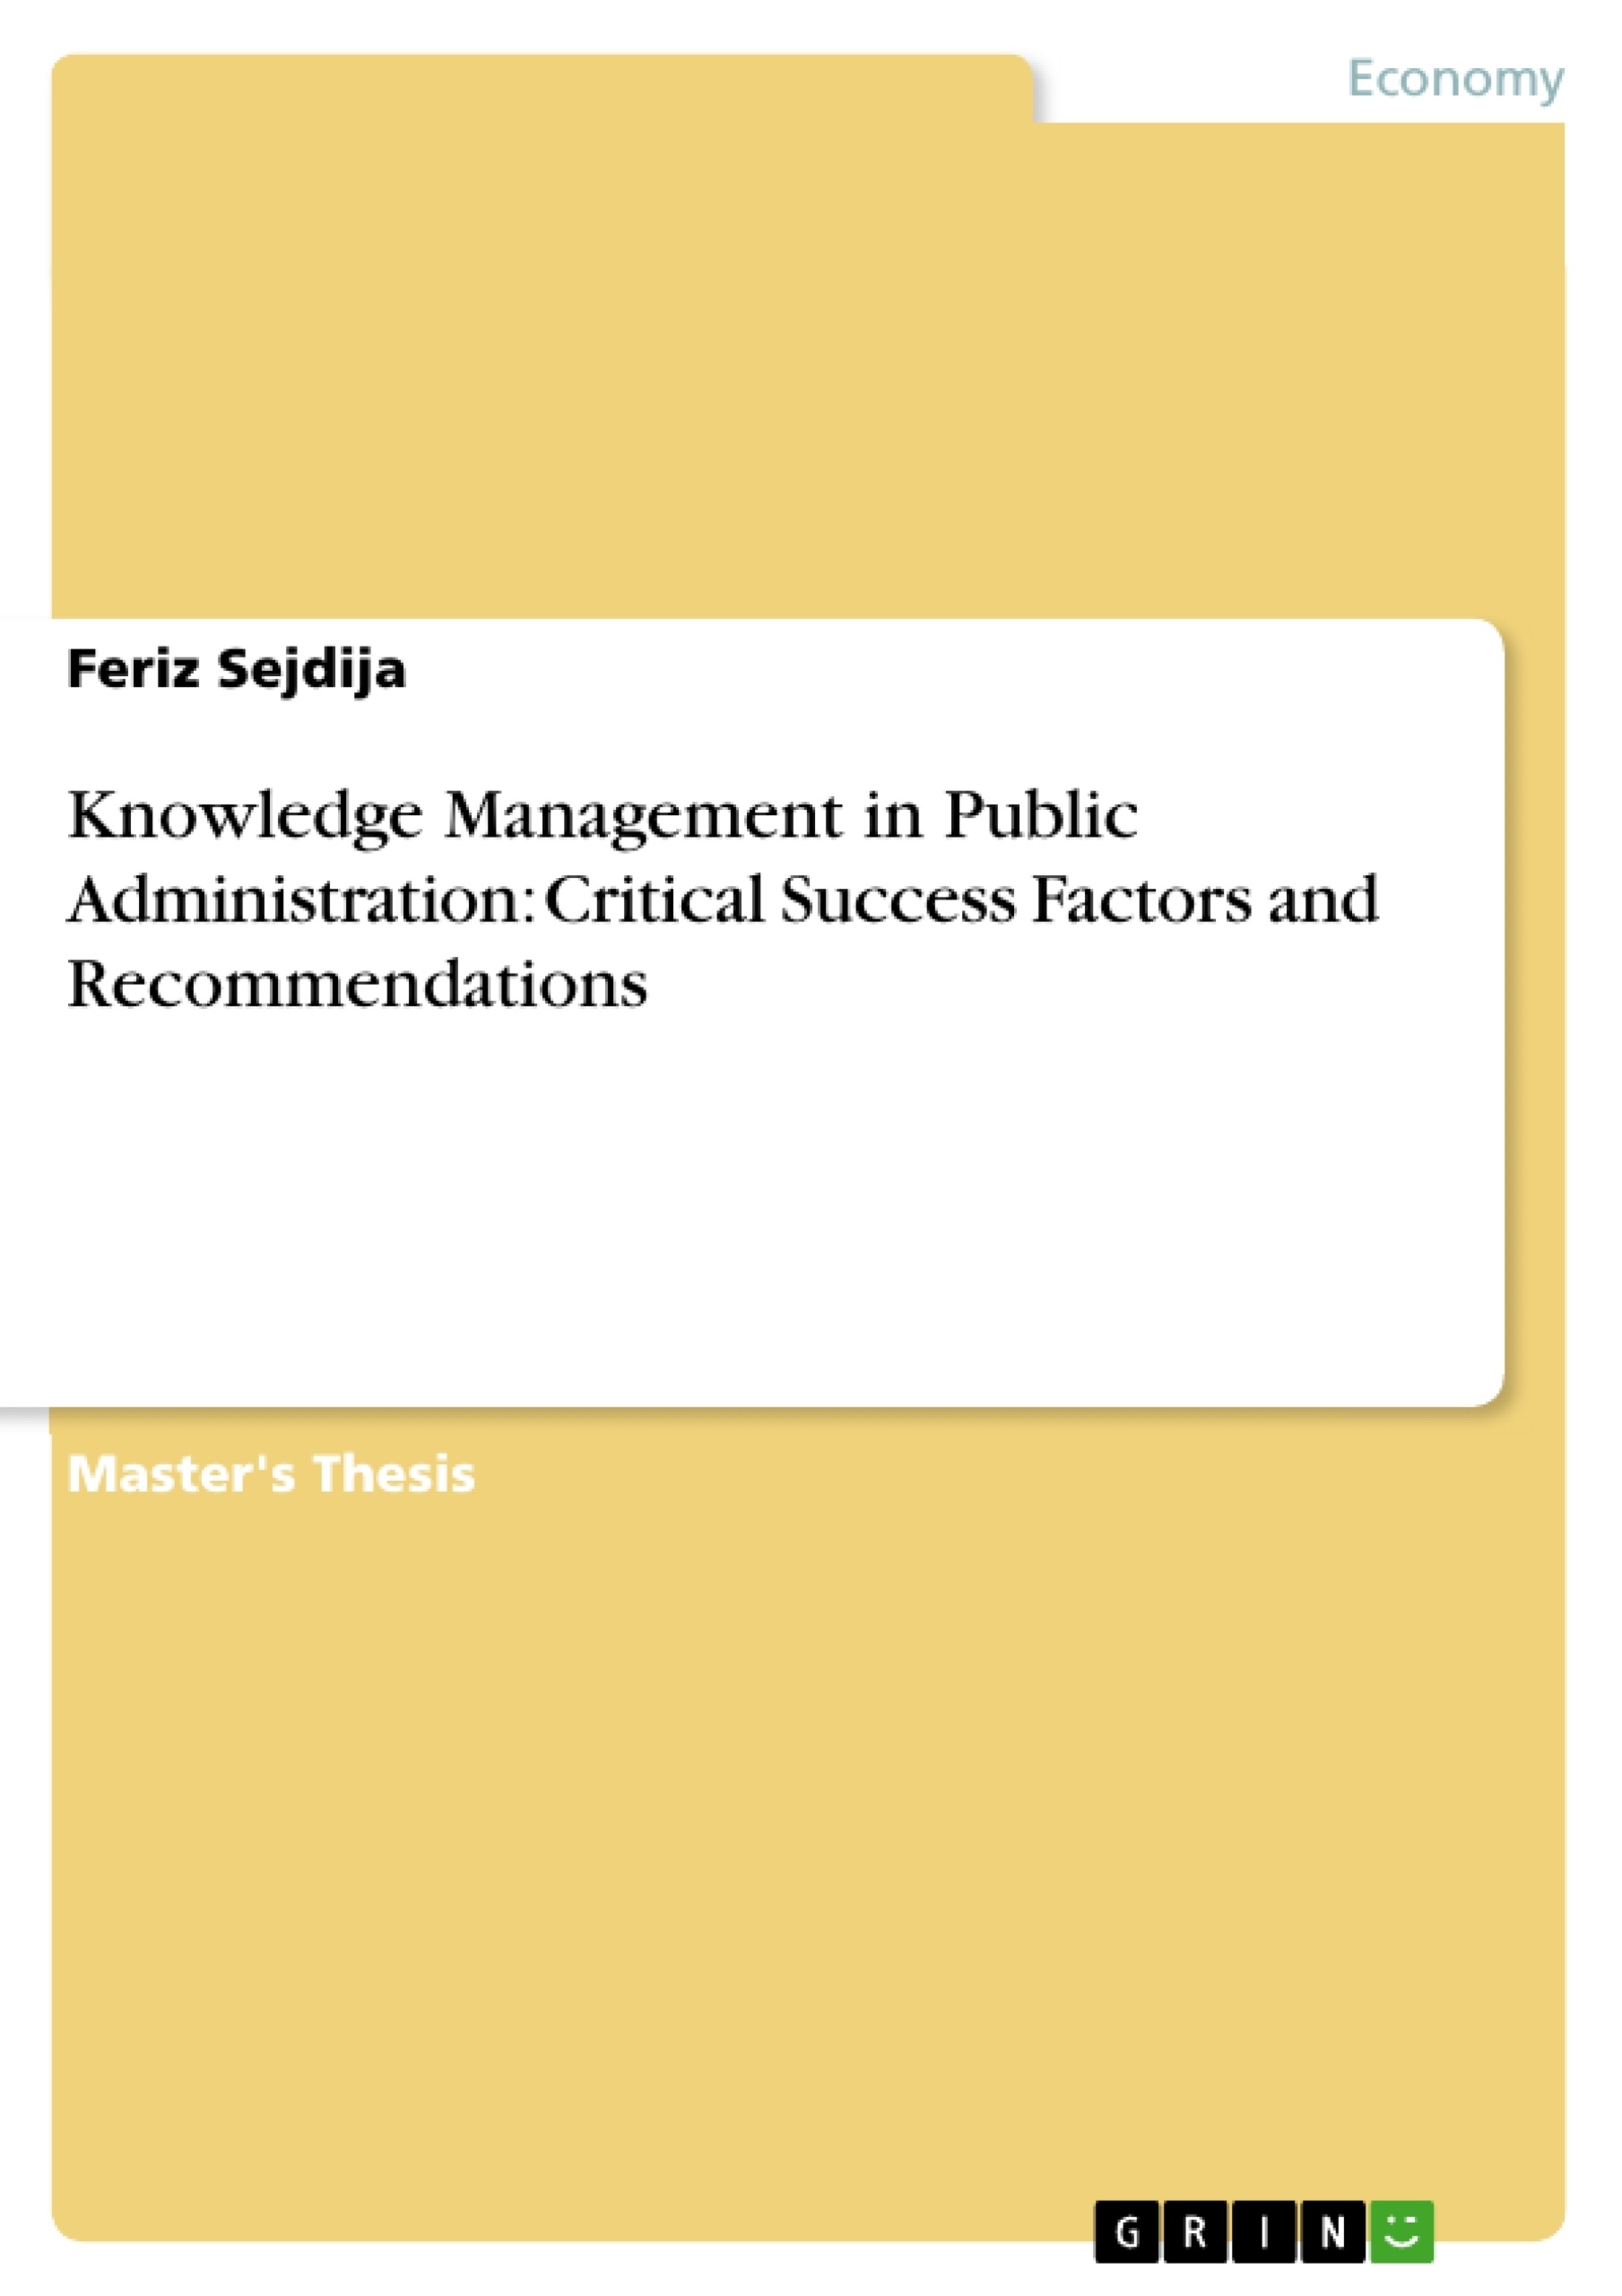 Title: Knowledge Management in Public Administration: Critical Success Factors and Recommendations